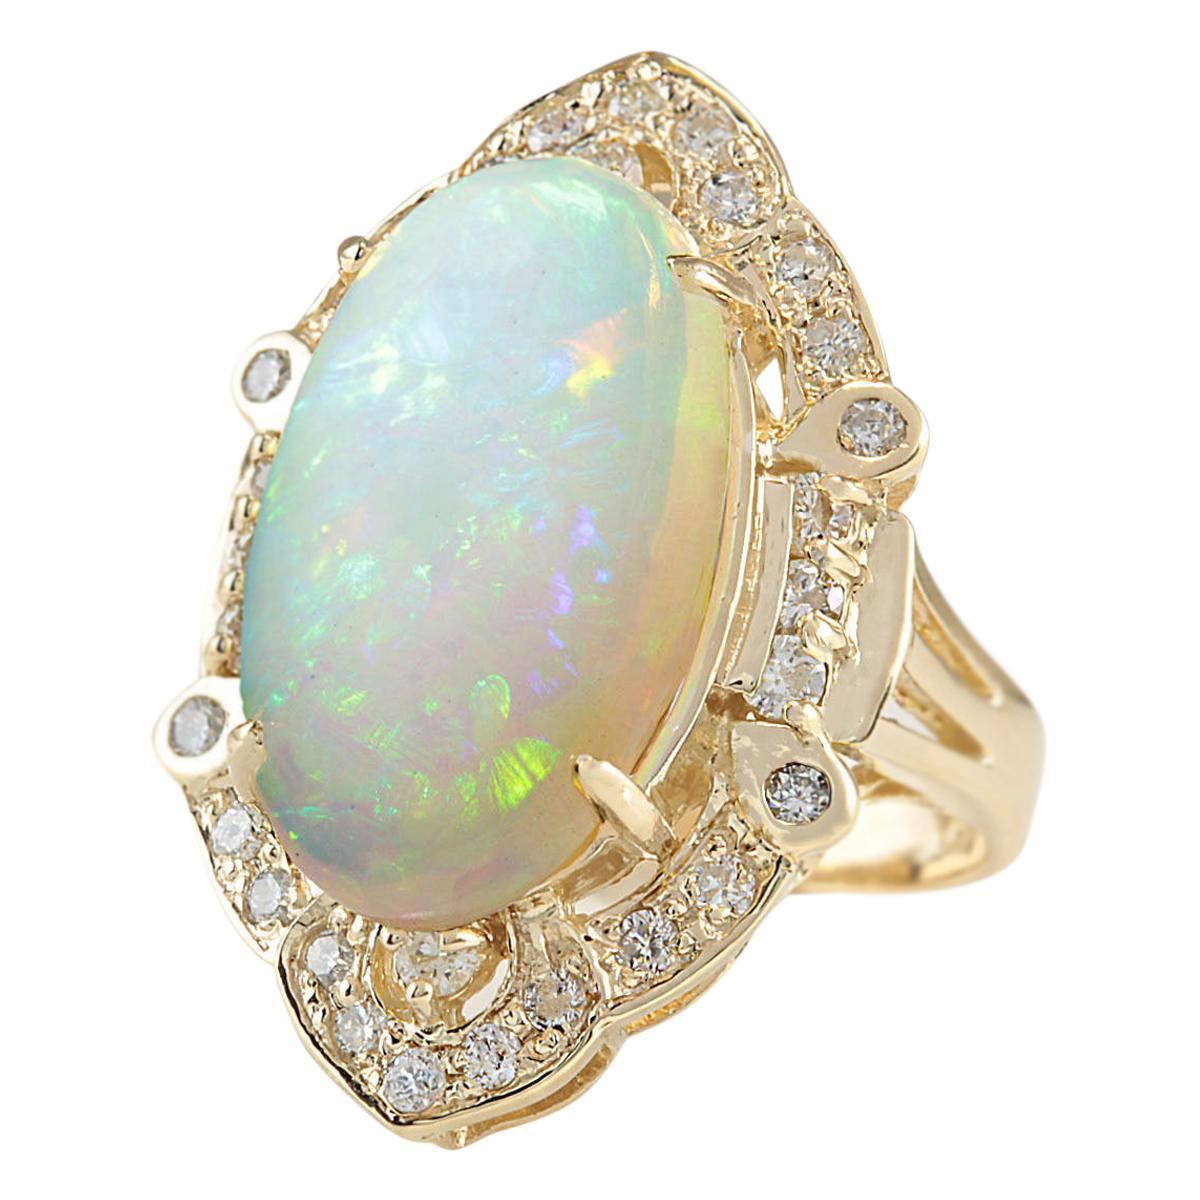 Stamped: 14K Yellow Gold
Total Ring Weight: 10.0 Grams
Total Natural Opal Weight is 8.25 Carat (Measures: 18.00x13.00 mm)
Color: Multicolor
Diamond Weight: Total Natural Diamond Weight is 0.80 Carat
Color: F-G, Clarity: VS2-SI1
Face Measures: